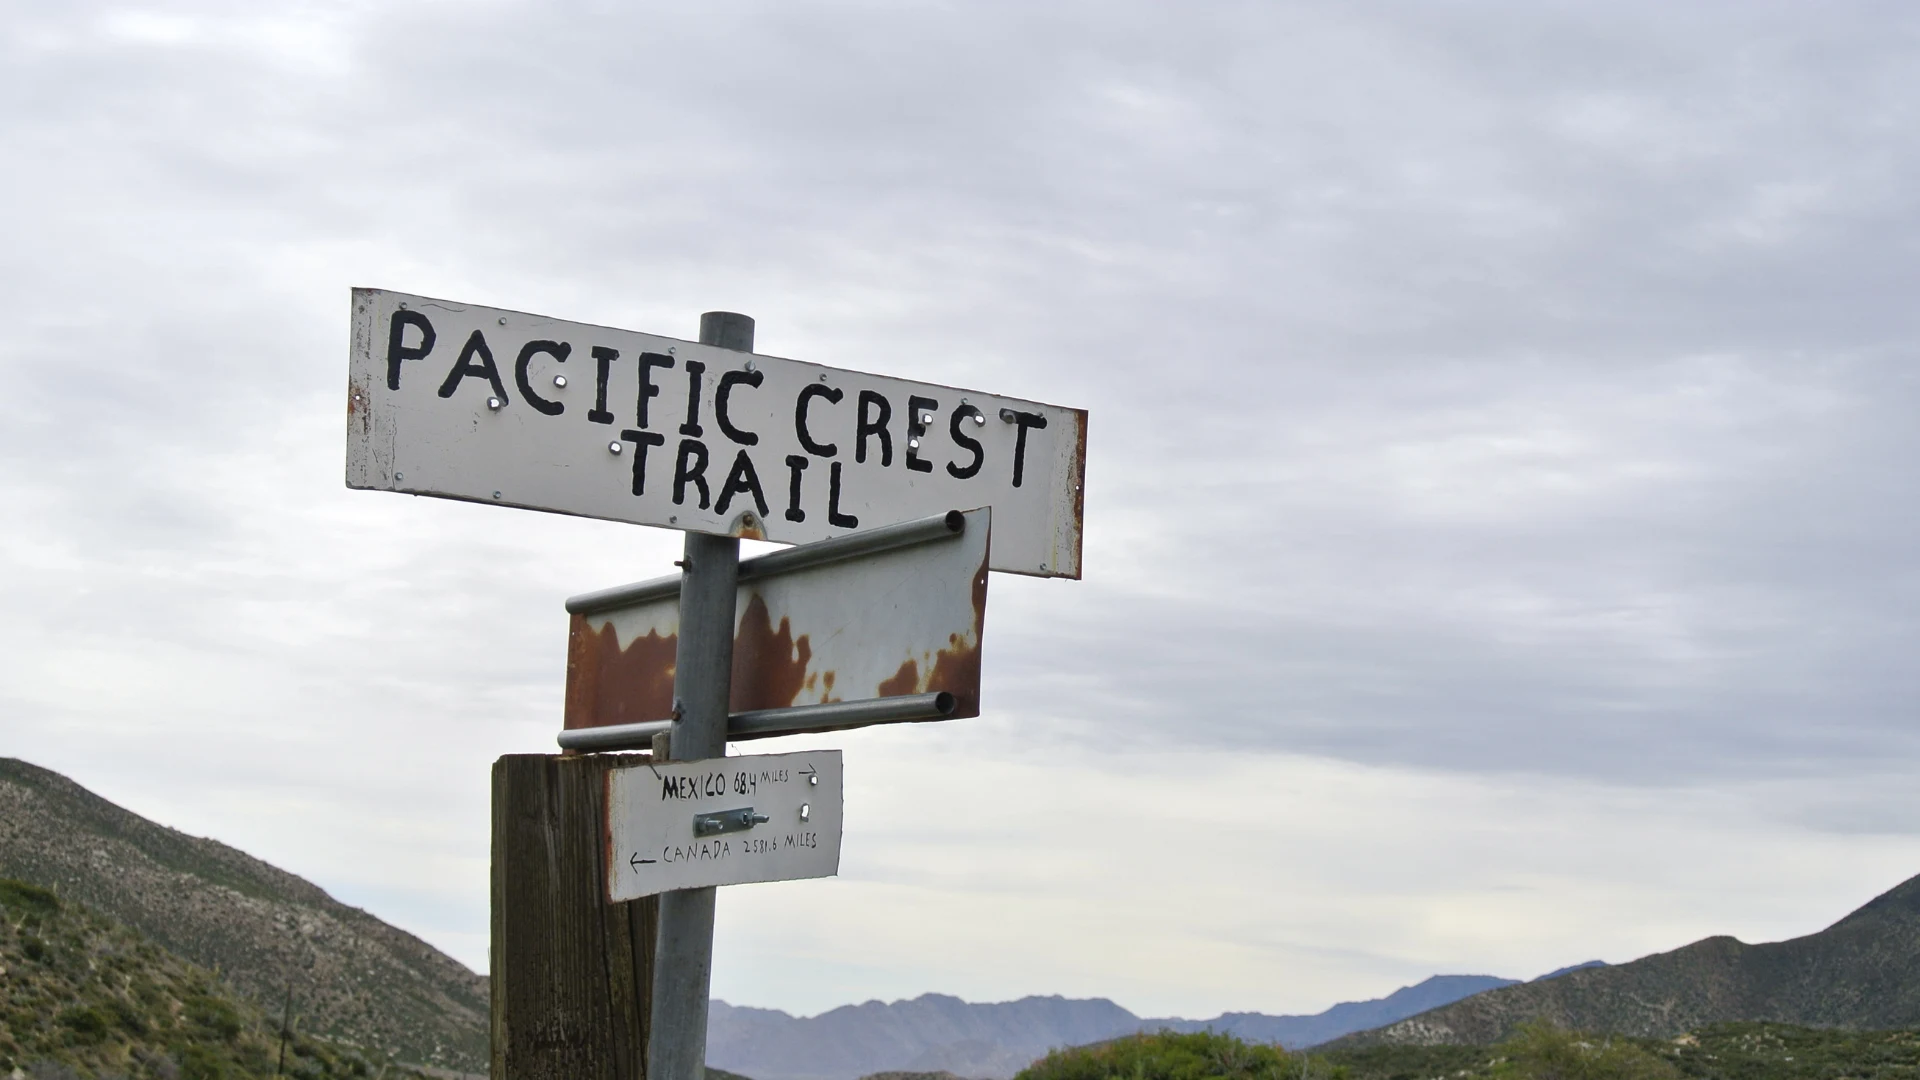 Pacific Crest Trail trail sign